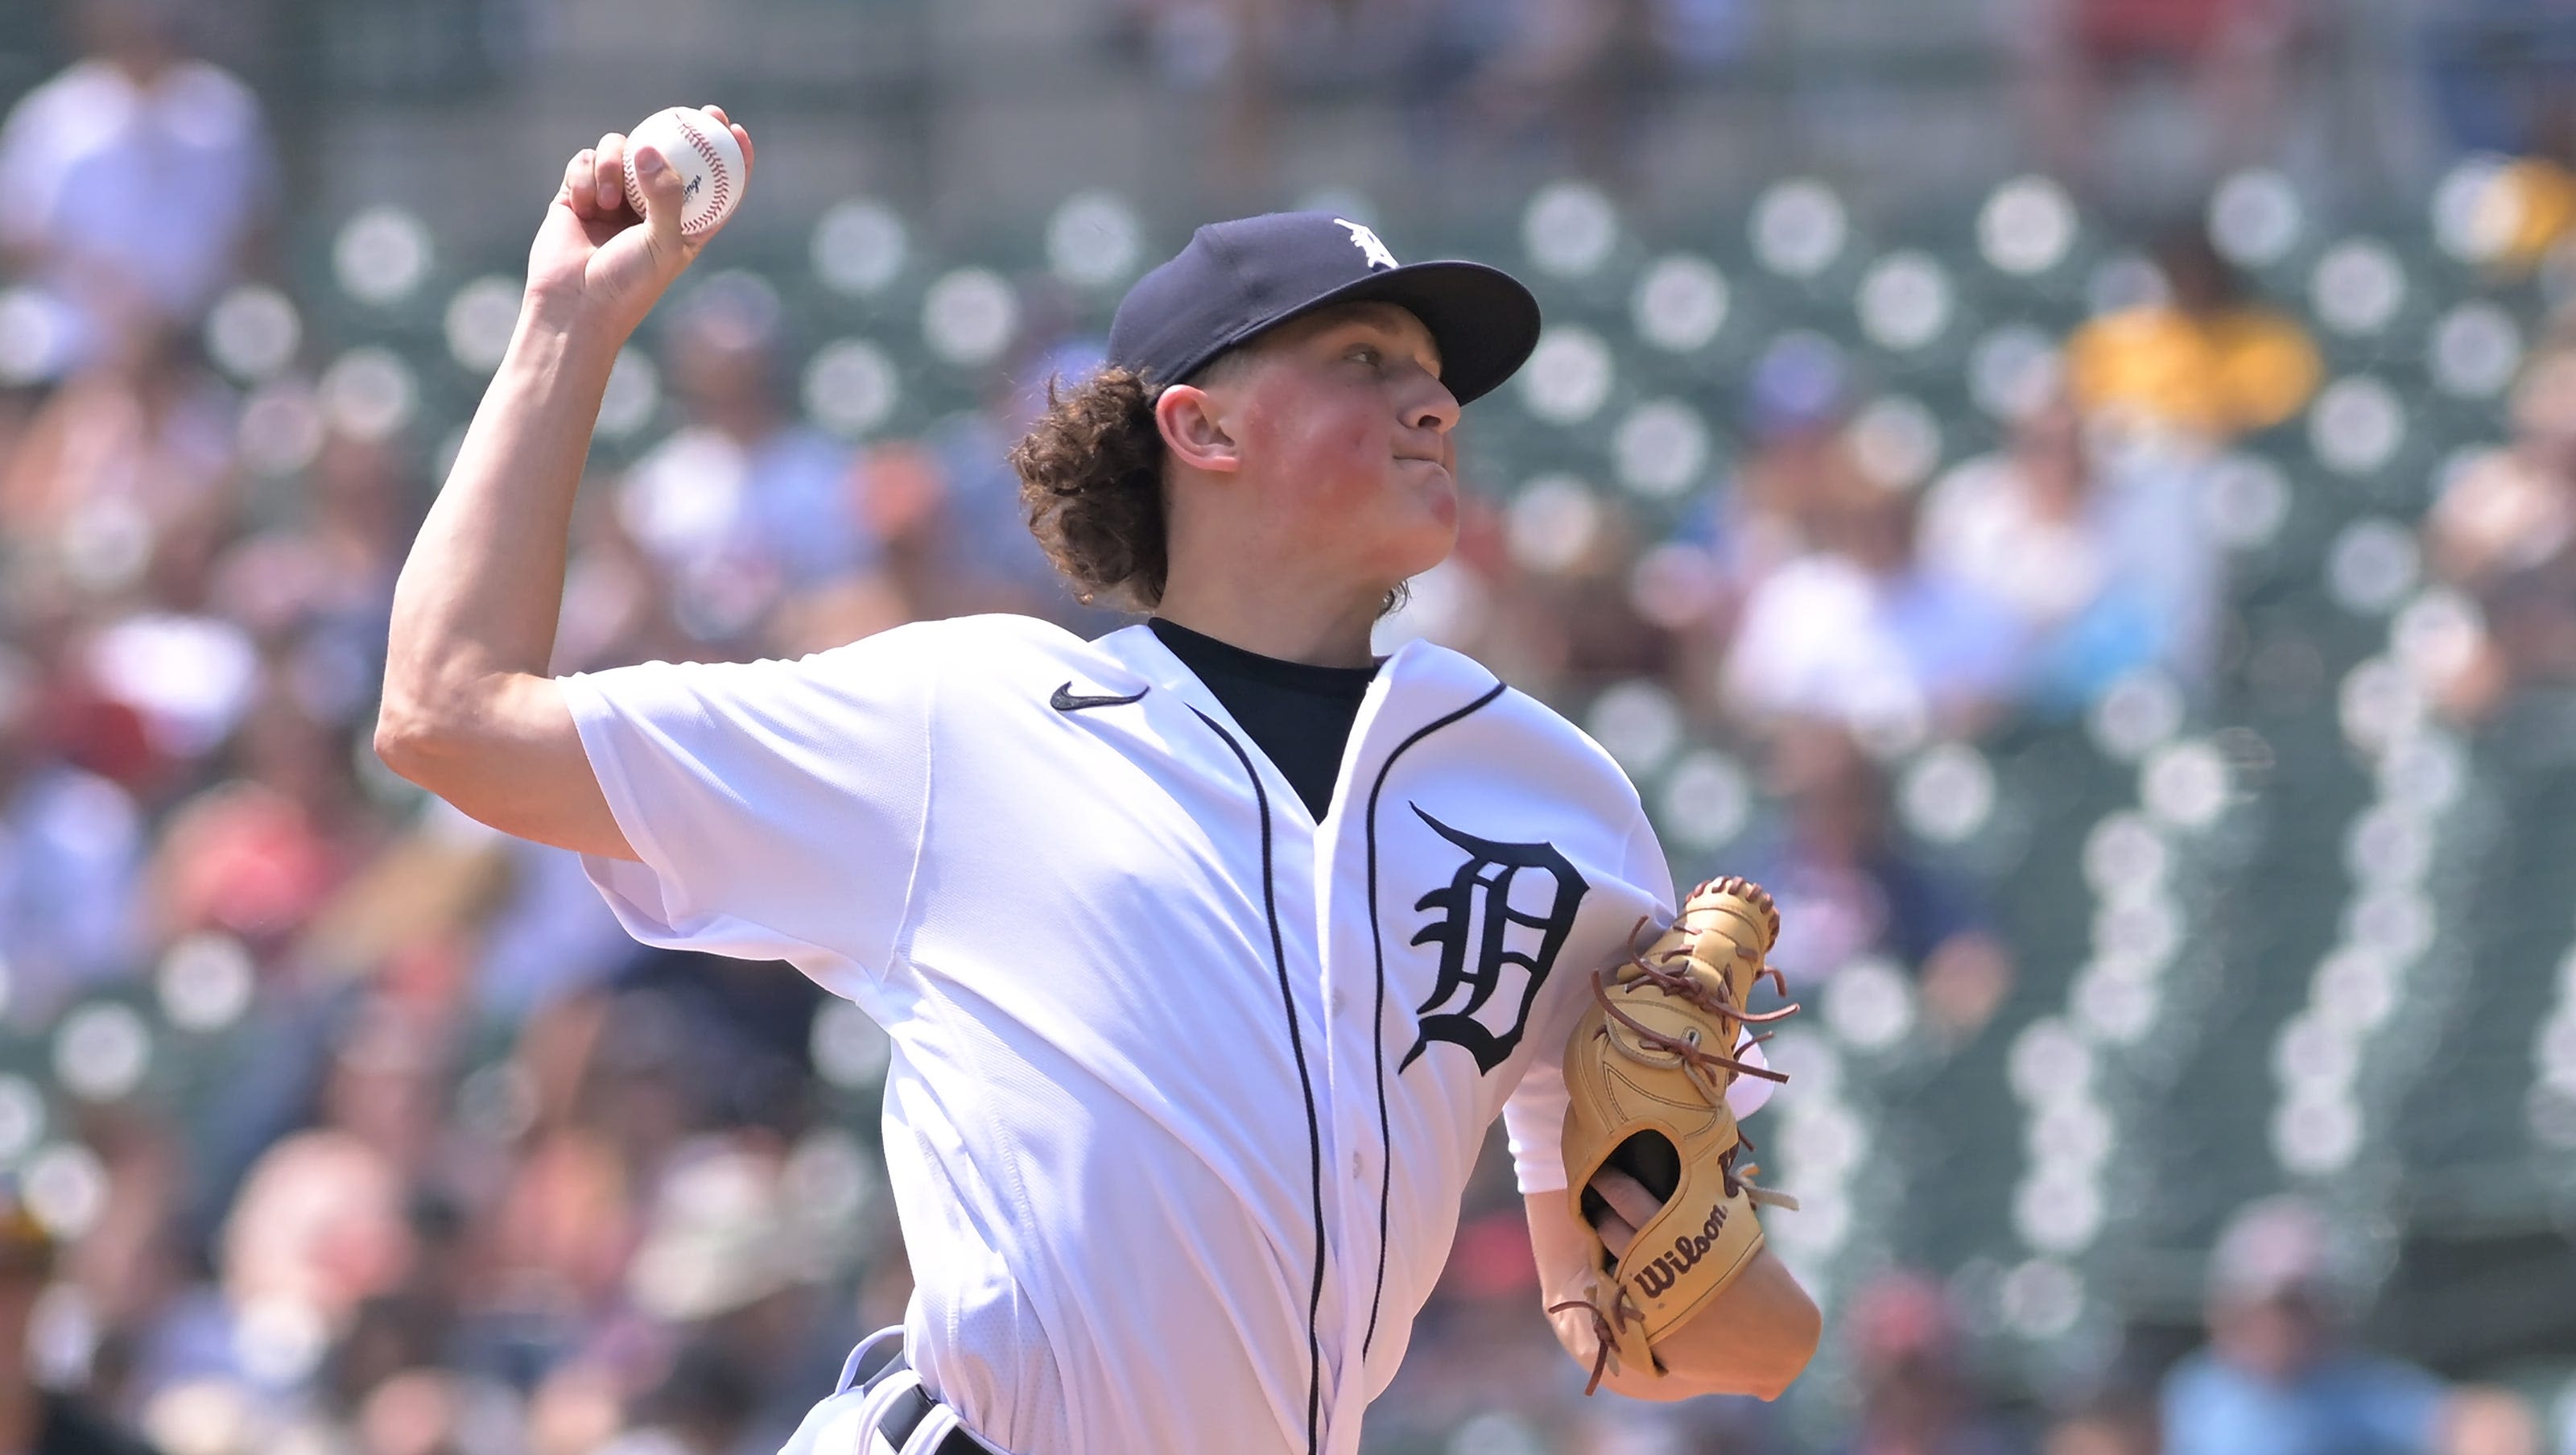 On deck: Tigers open three-game series against Royals at Comerica Park